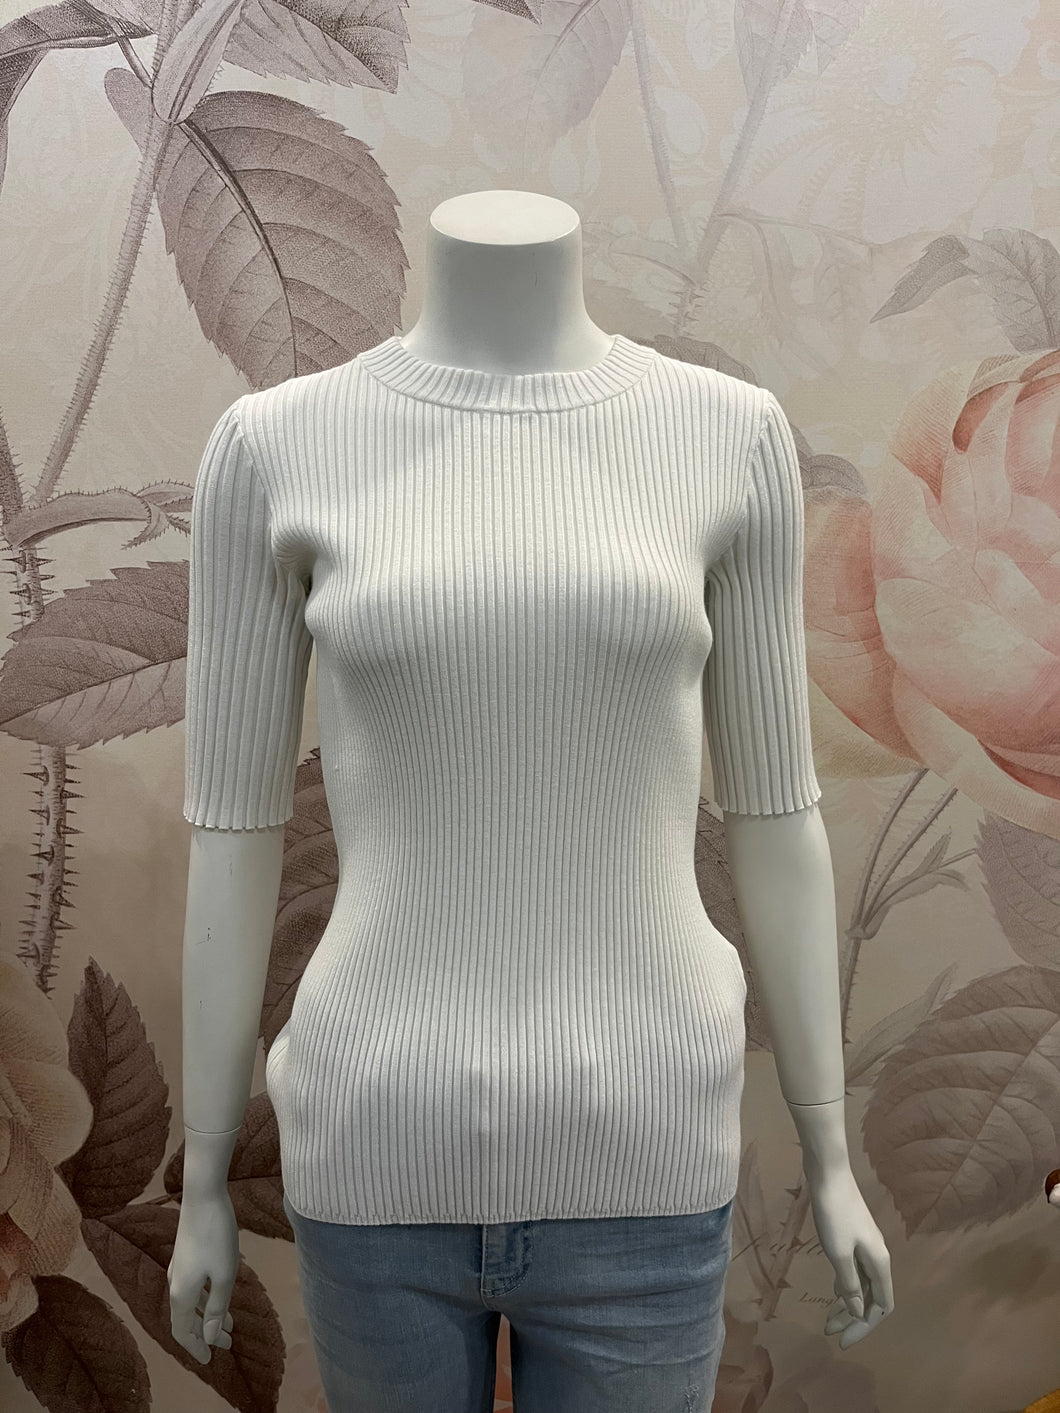 Ribbed Top - White